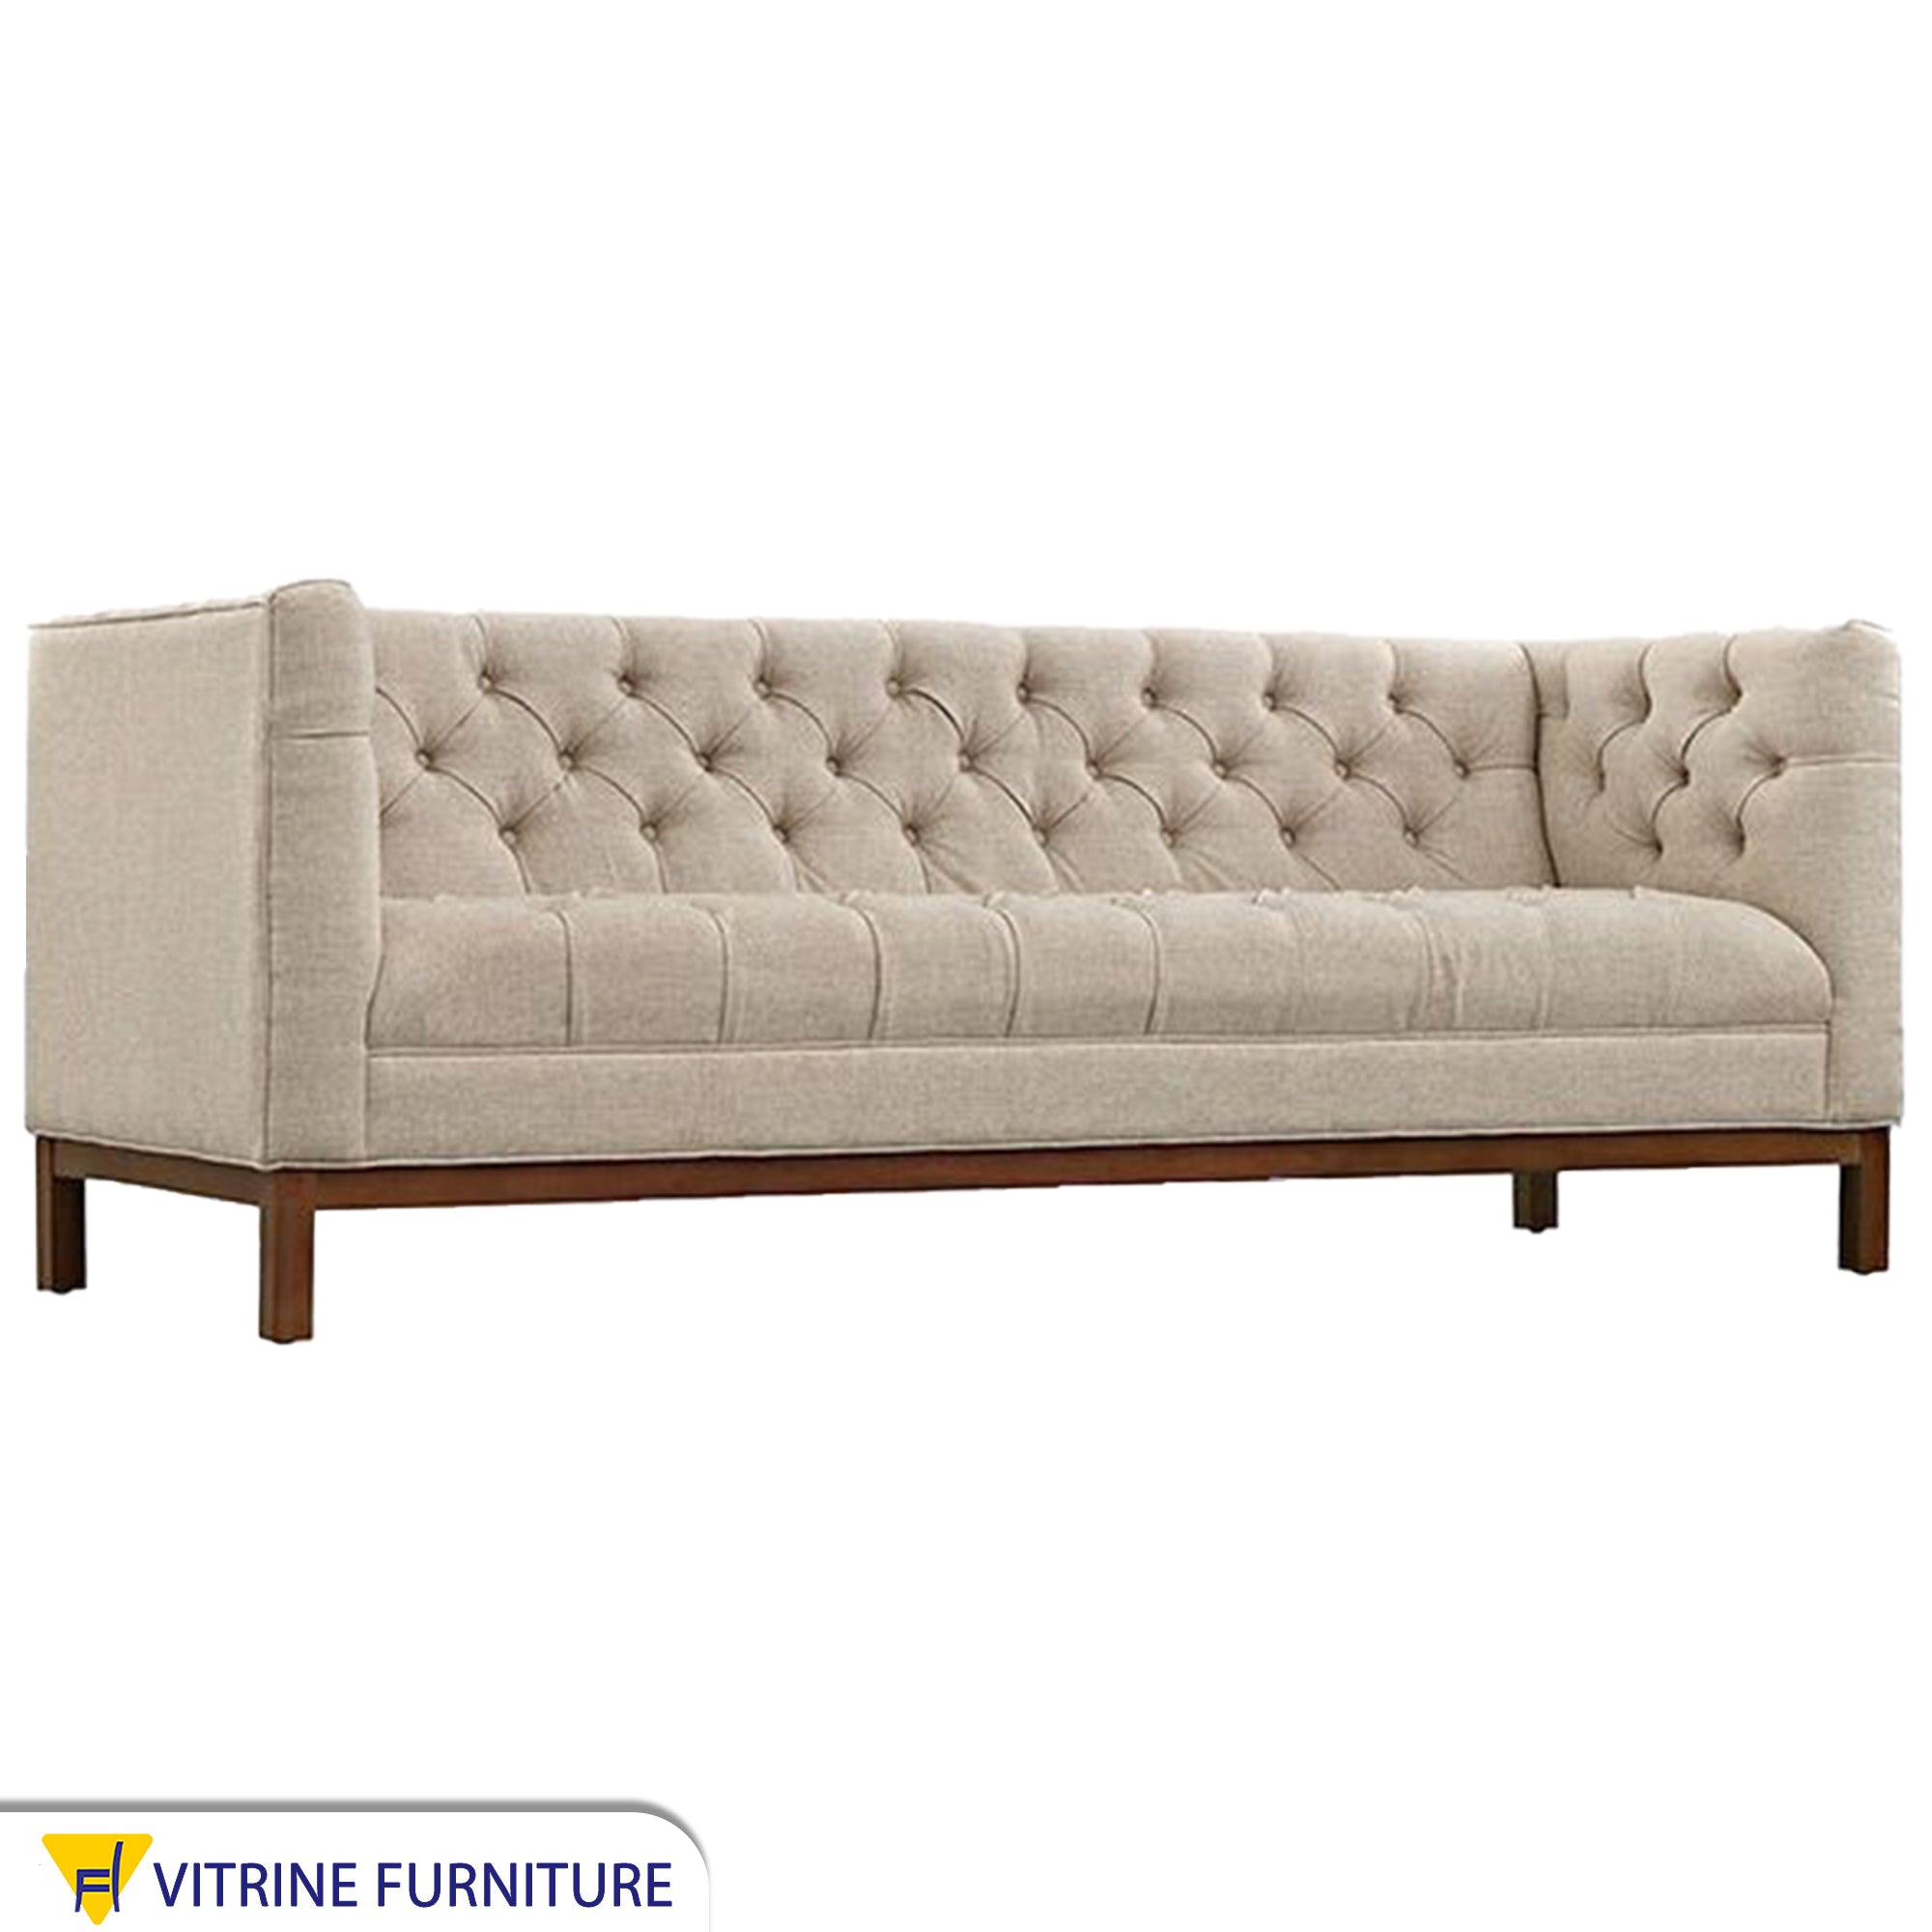 Beige sofa with capotonite grains on the back and the handle